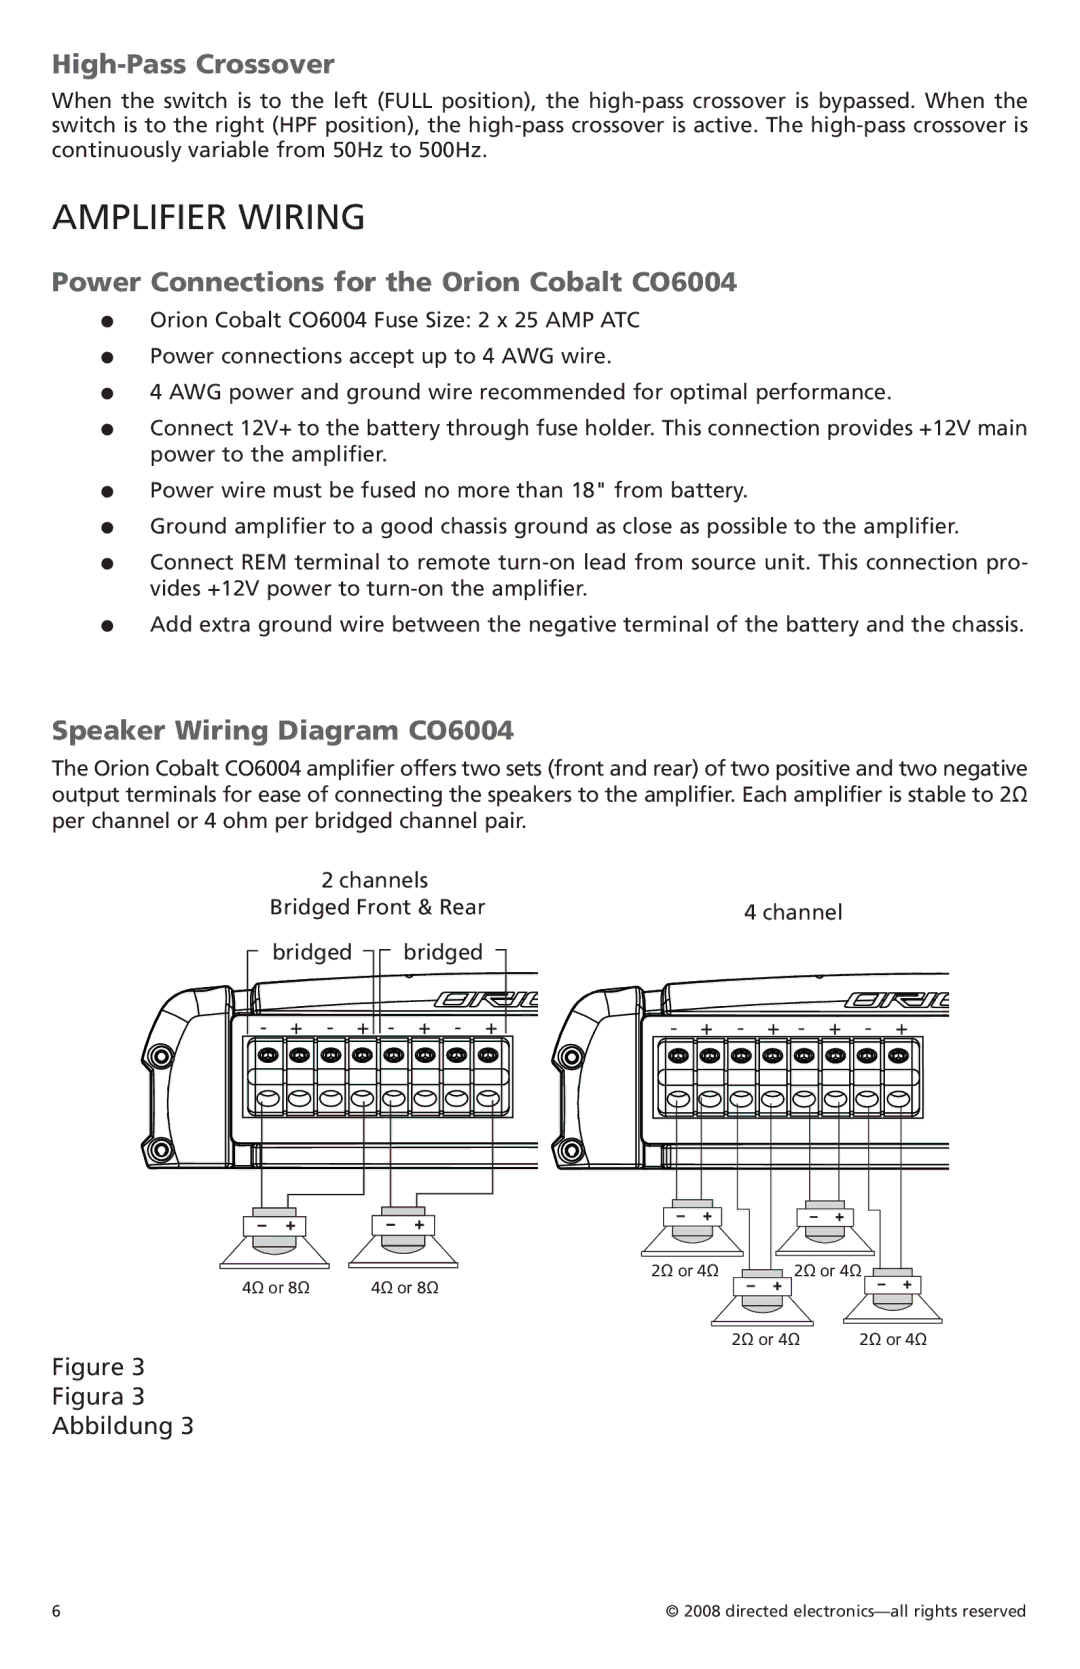 Orion Car Audio owner manual Amplifier Wiring, High-Pass Crossover, Power Connections for the Orion Cobalt CO6004 